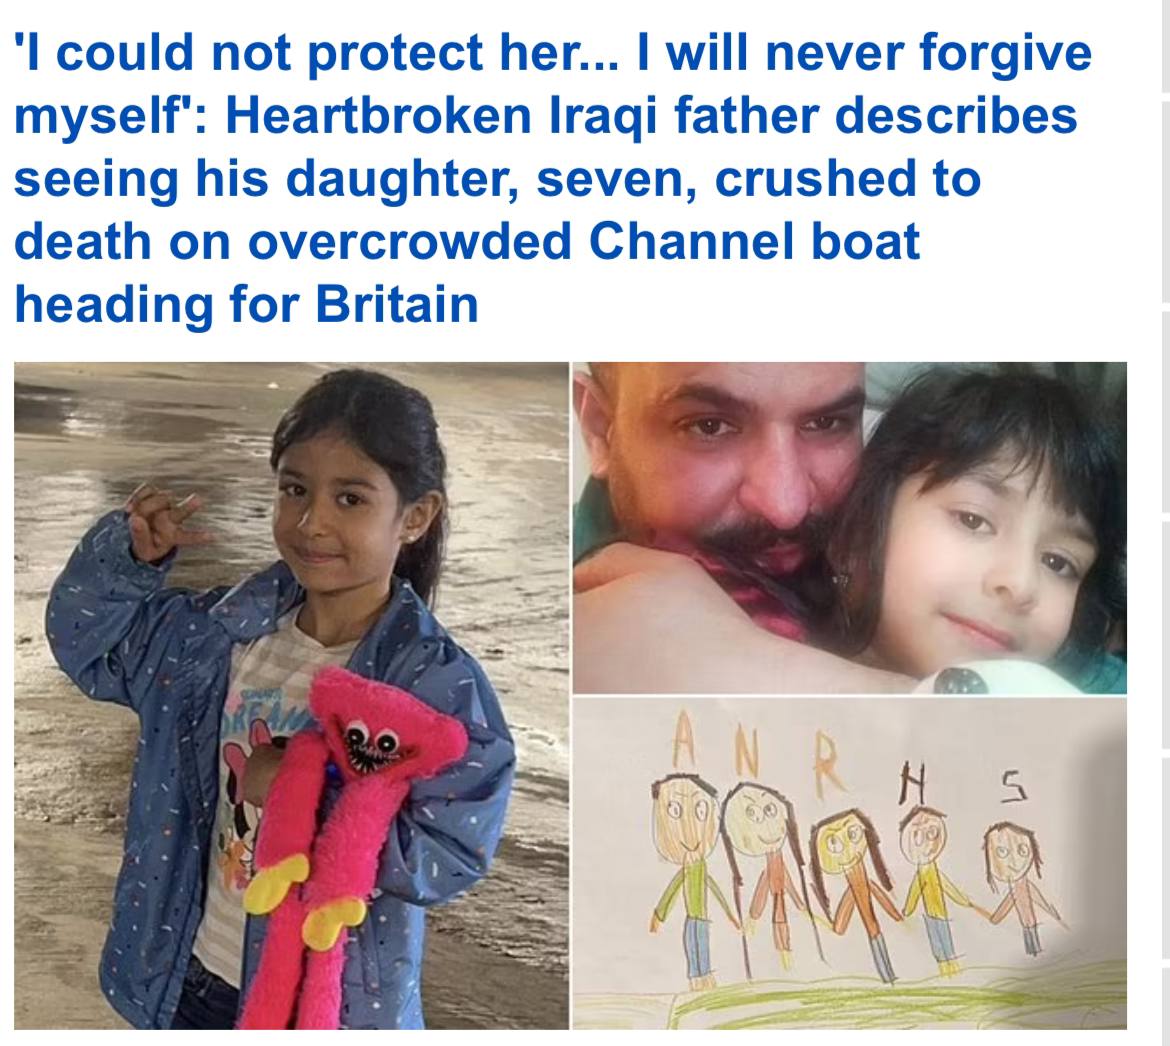 In Europe for 14 years. Refused asylum in Belgium & Sweden. Sweden was going to deport him and his family, as his hometown of Basra in Iraq is classified as a safe zone. Instead, he attempted to cross the English Channel four times with his wife and three children. Due to